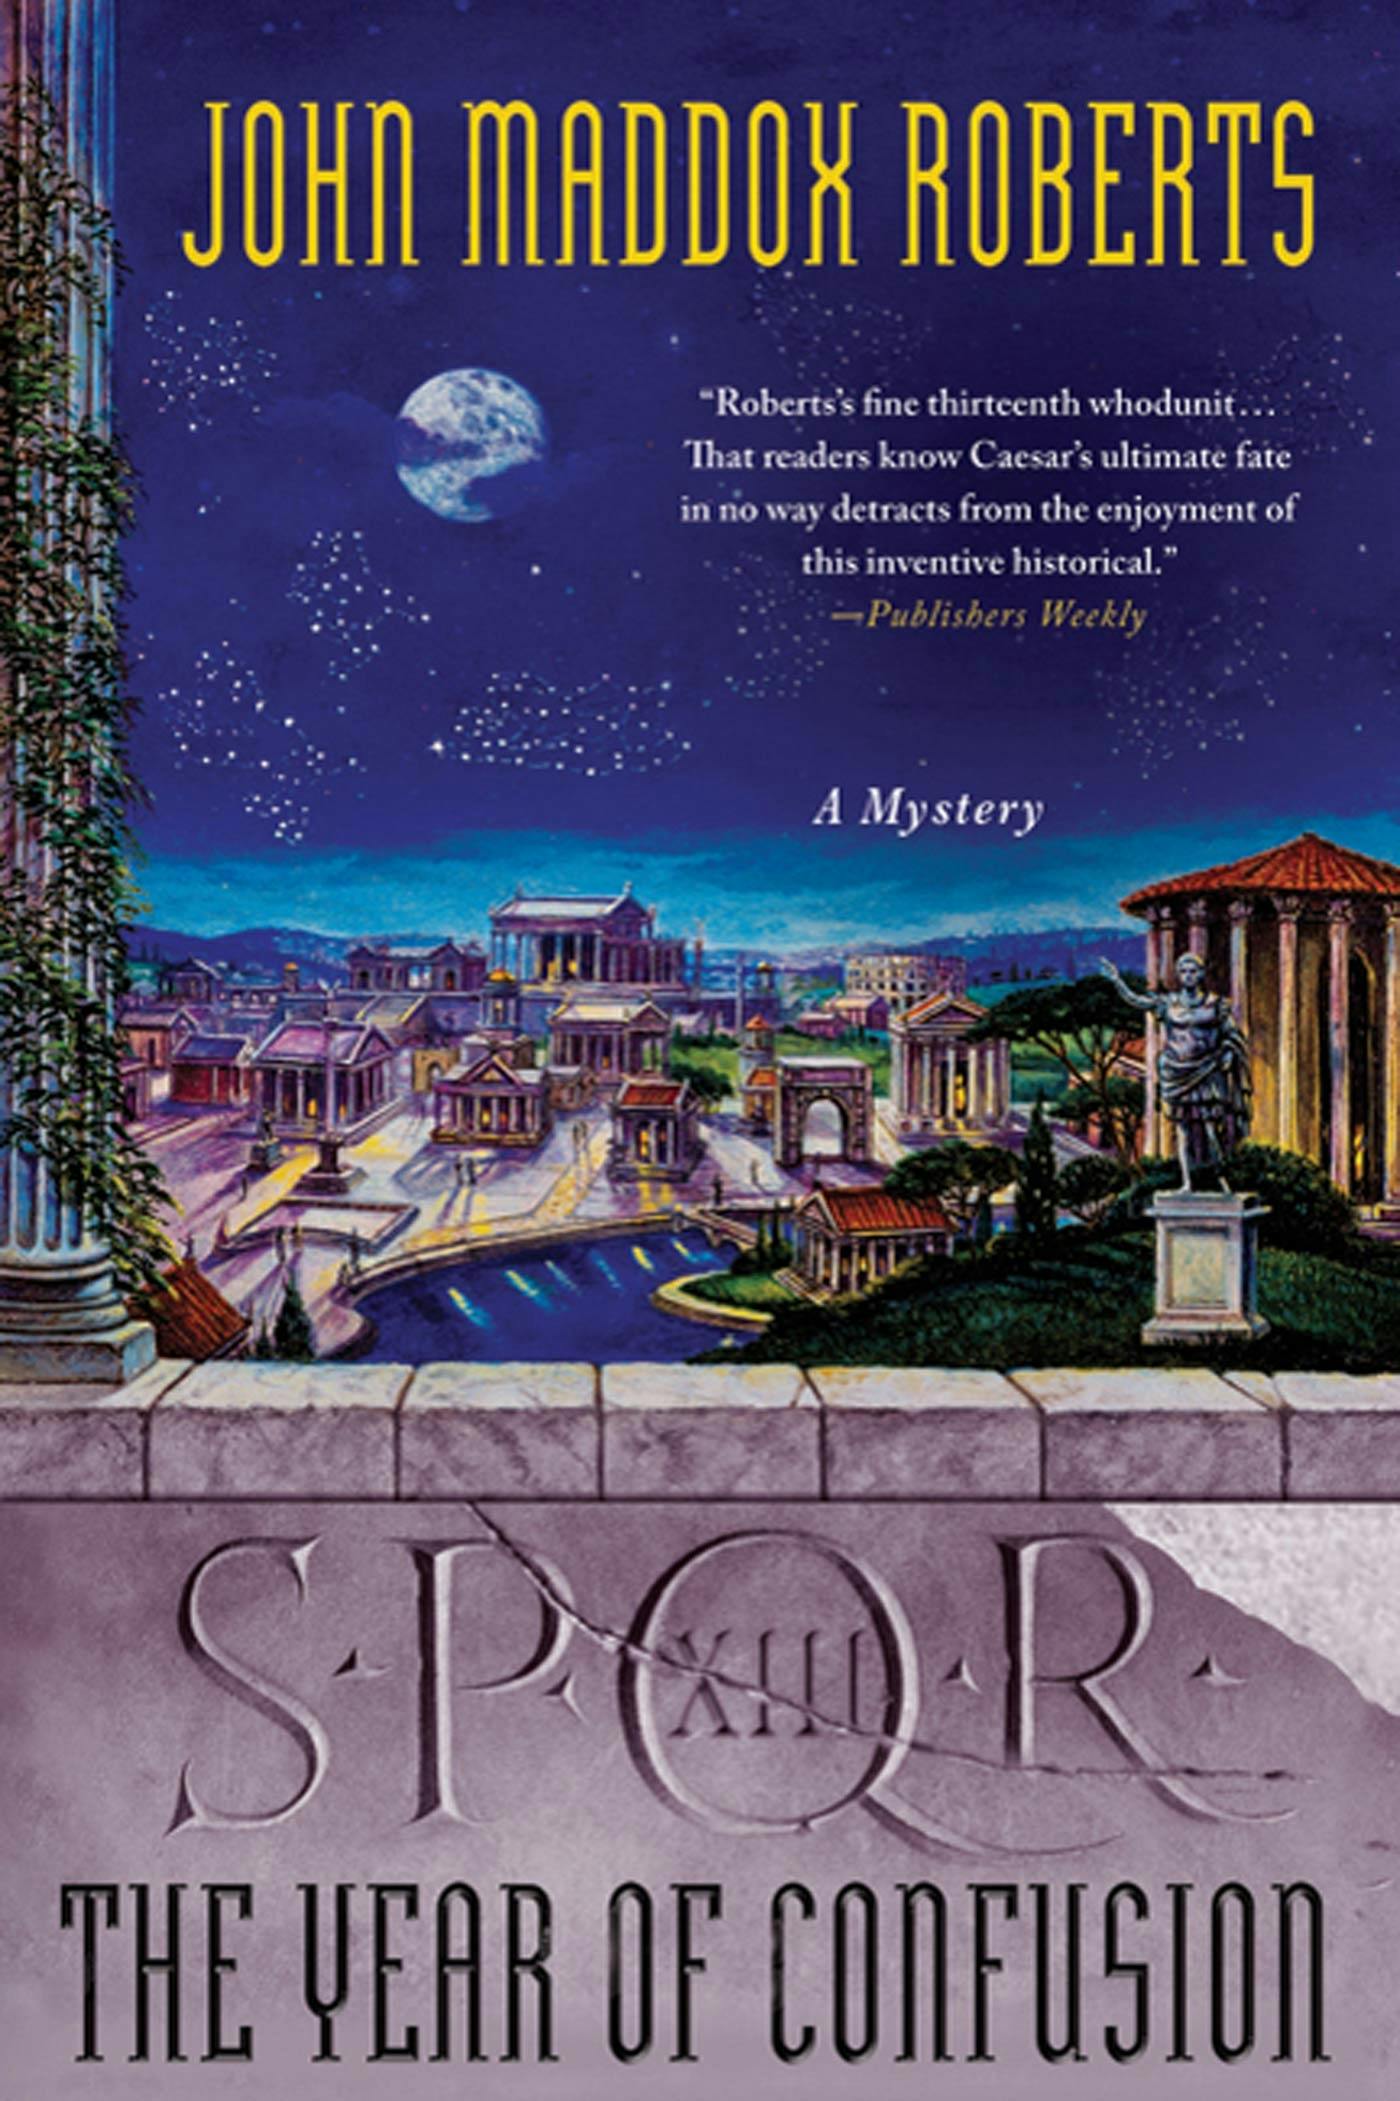 SPQR XIII: The Year of Confusion